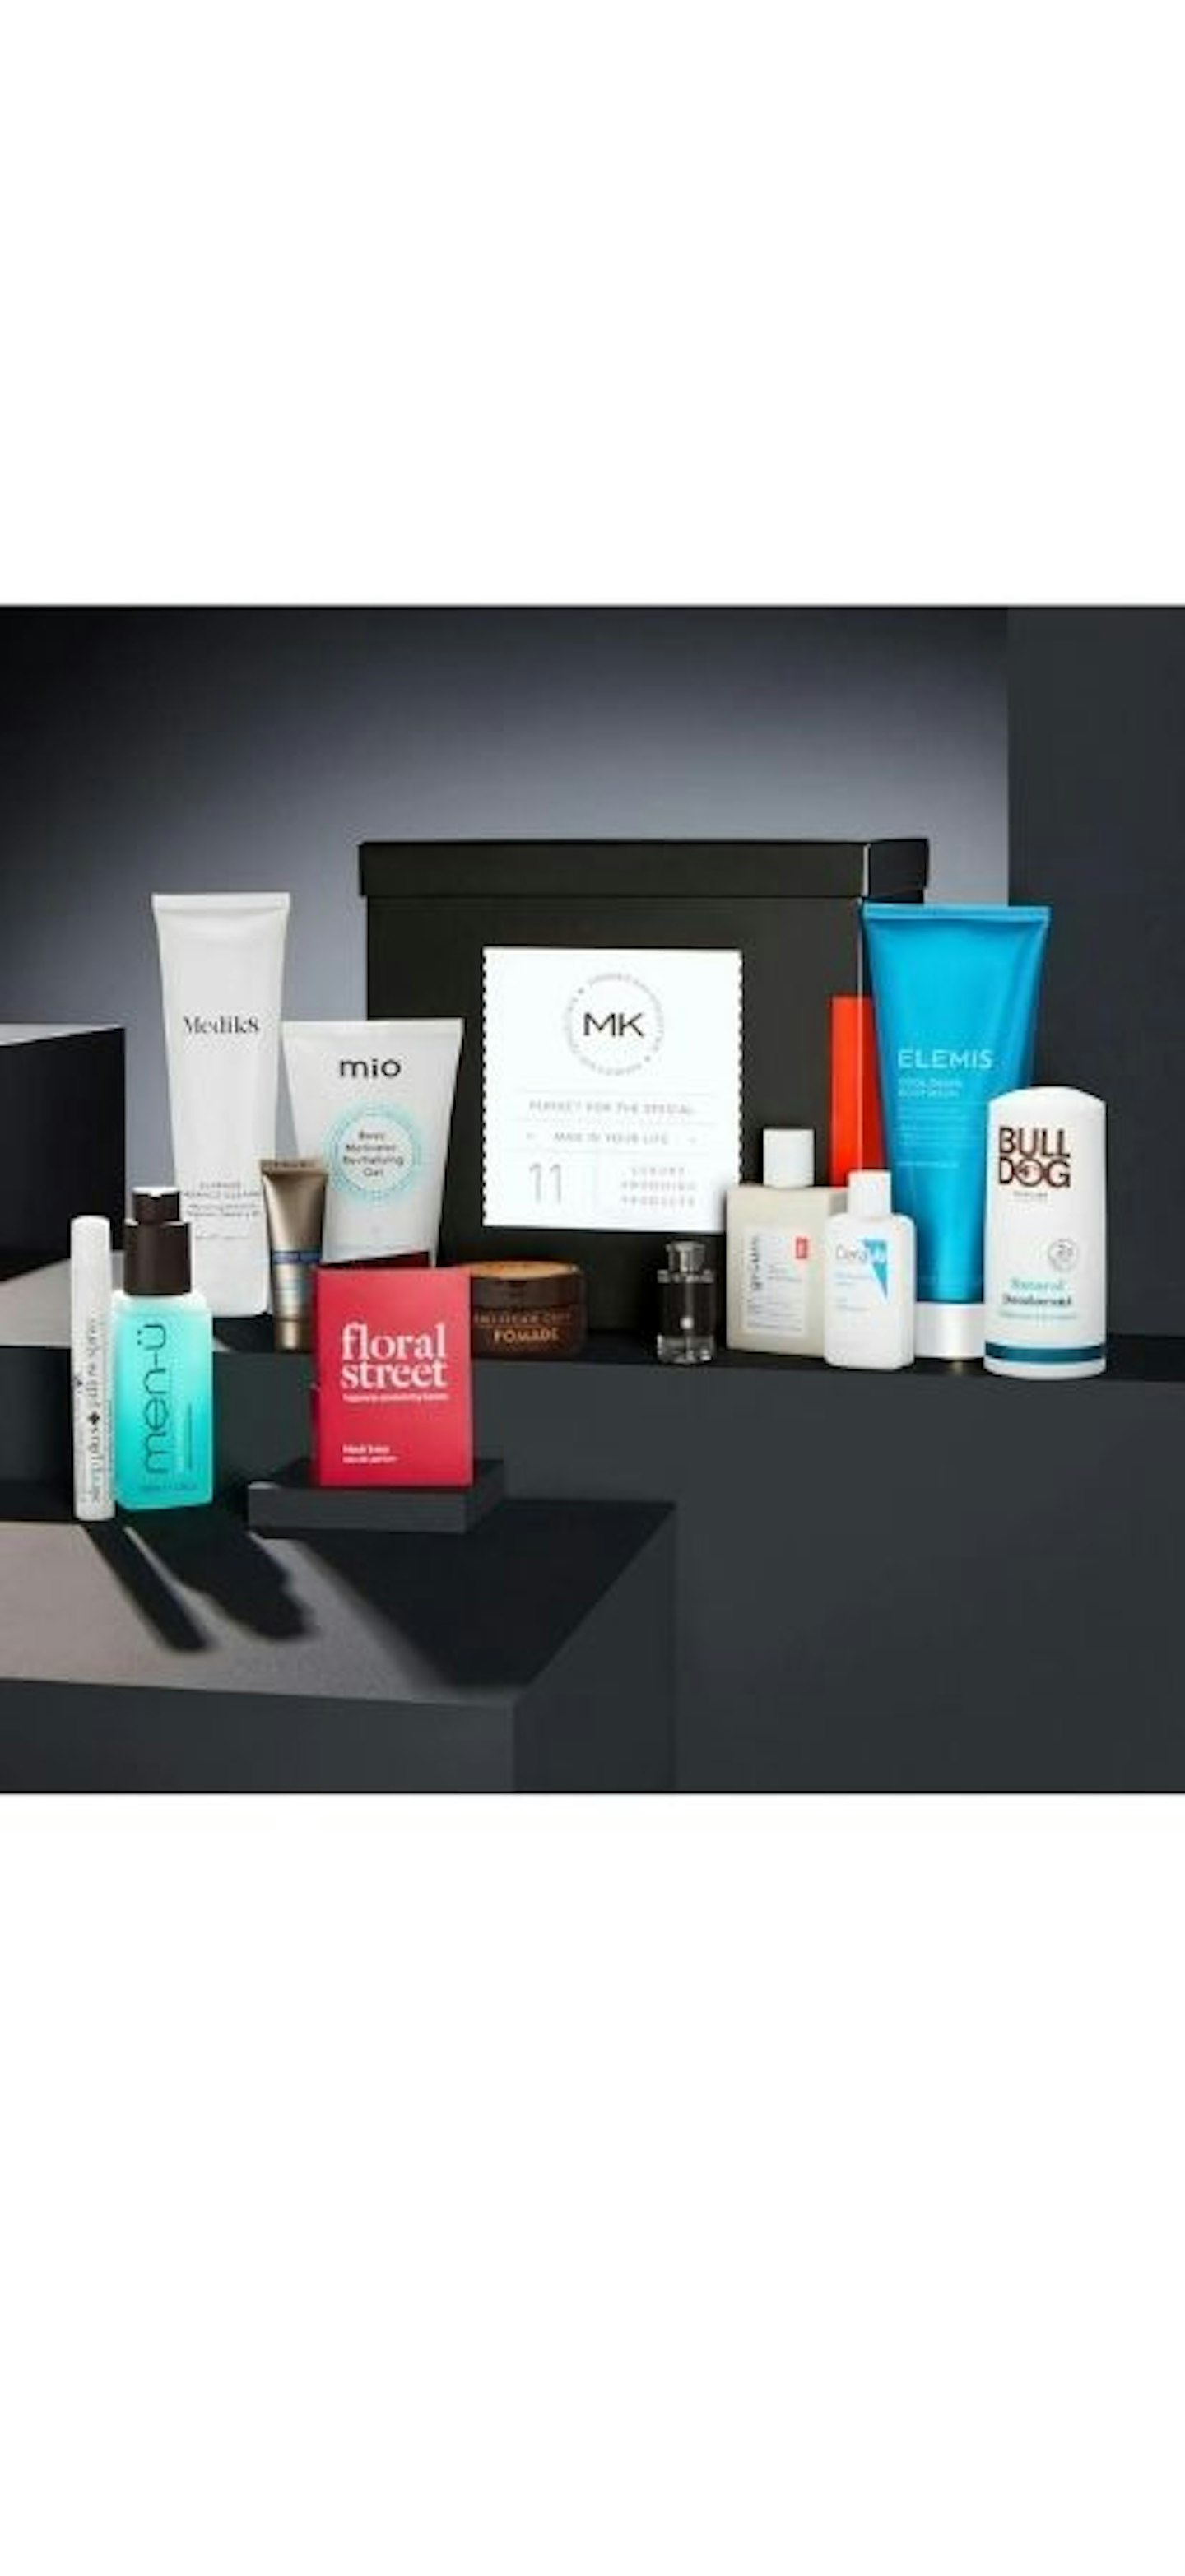 LOOKFANTASTIC x Mankind Father's Day Beauty Box